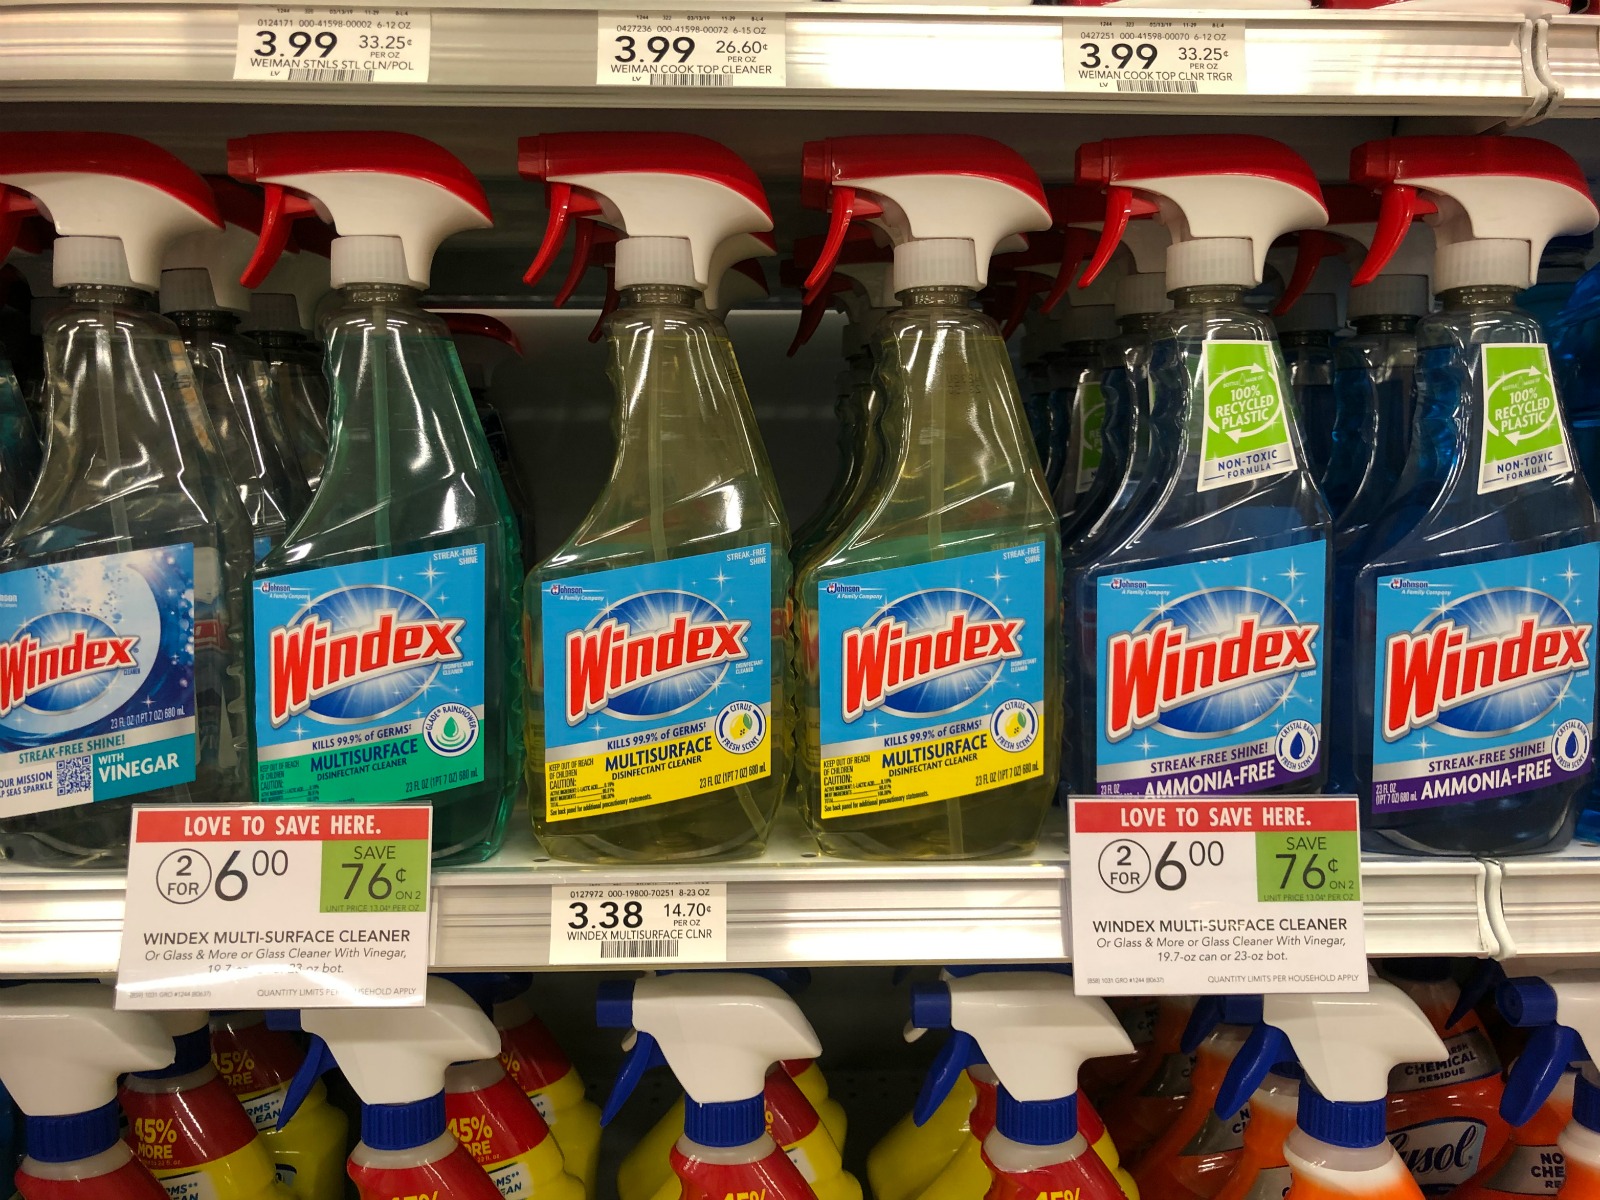 Get Your Home Ready For Holiday Guests & Save On Windex® Products At Publix on I Heart Publix 1